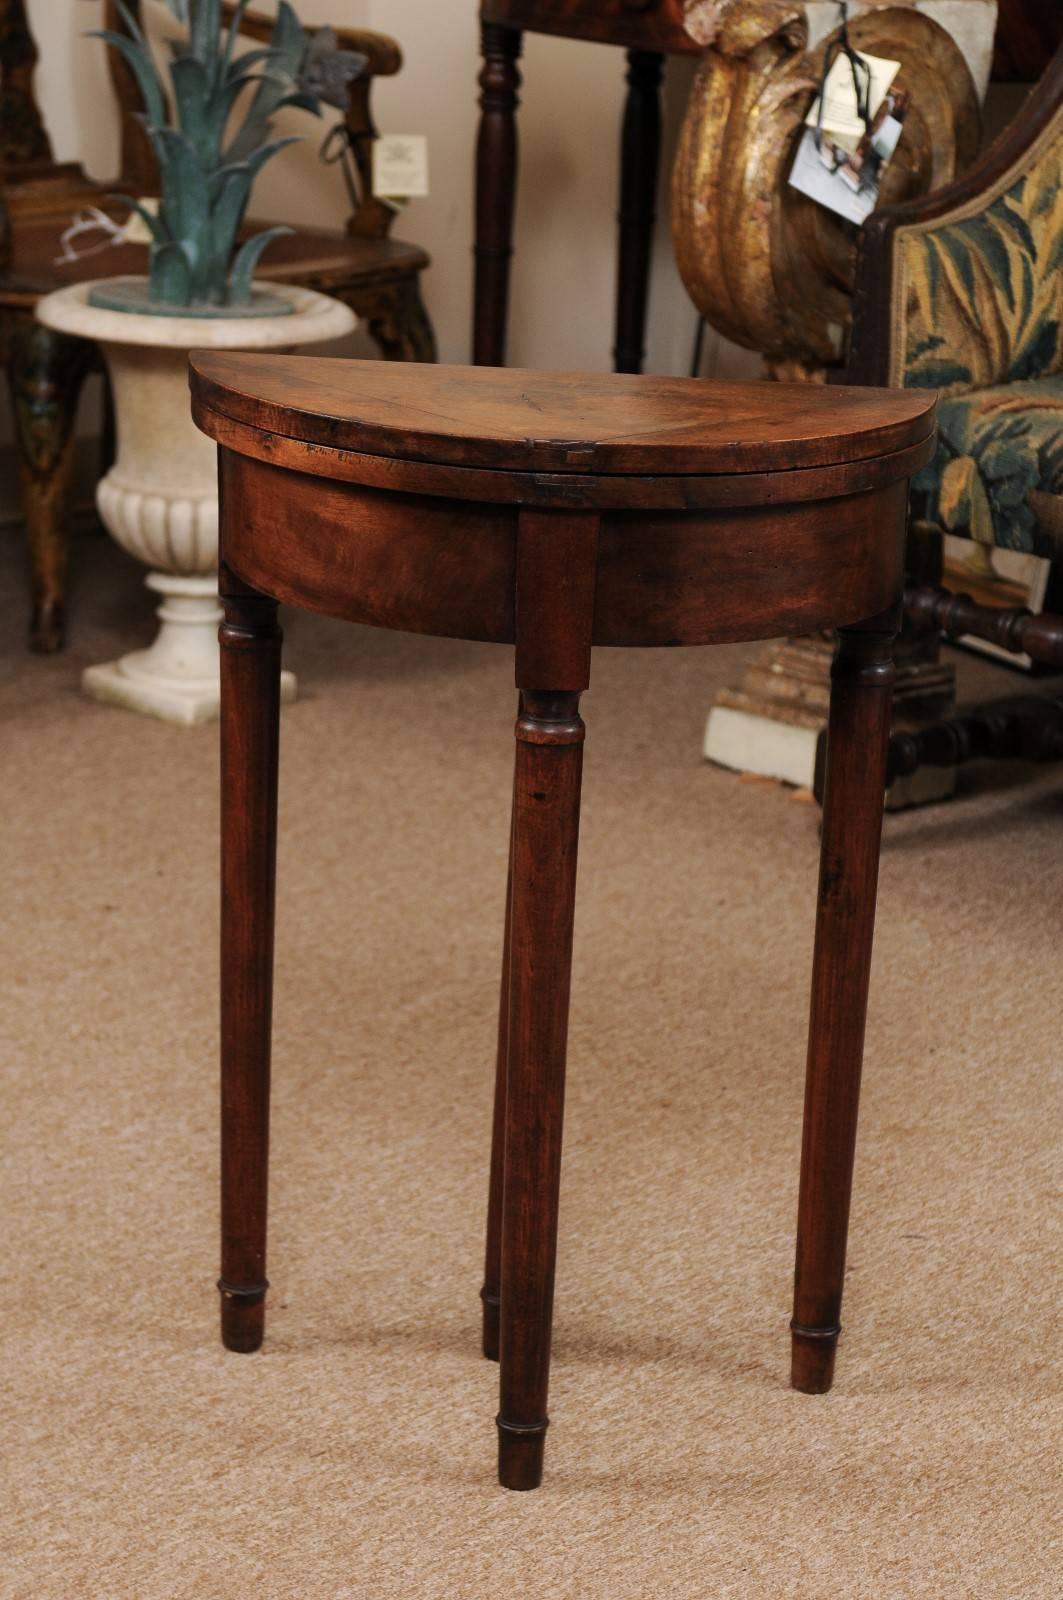 Petite walnut demilune side table with tapering legs; converts to round game table via drawer mechanism with hidden chip compartment, late 19th century, Italy.